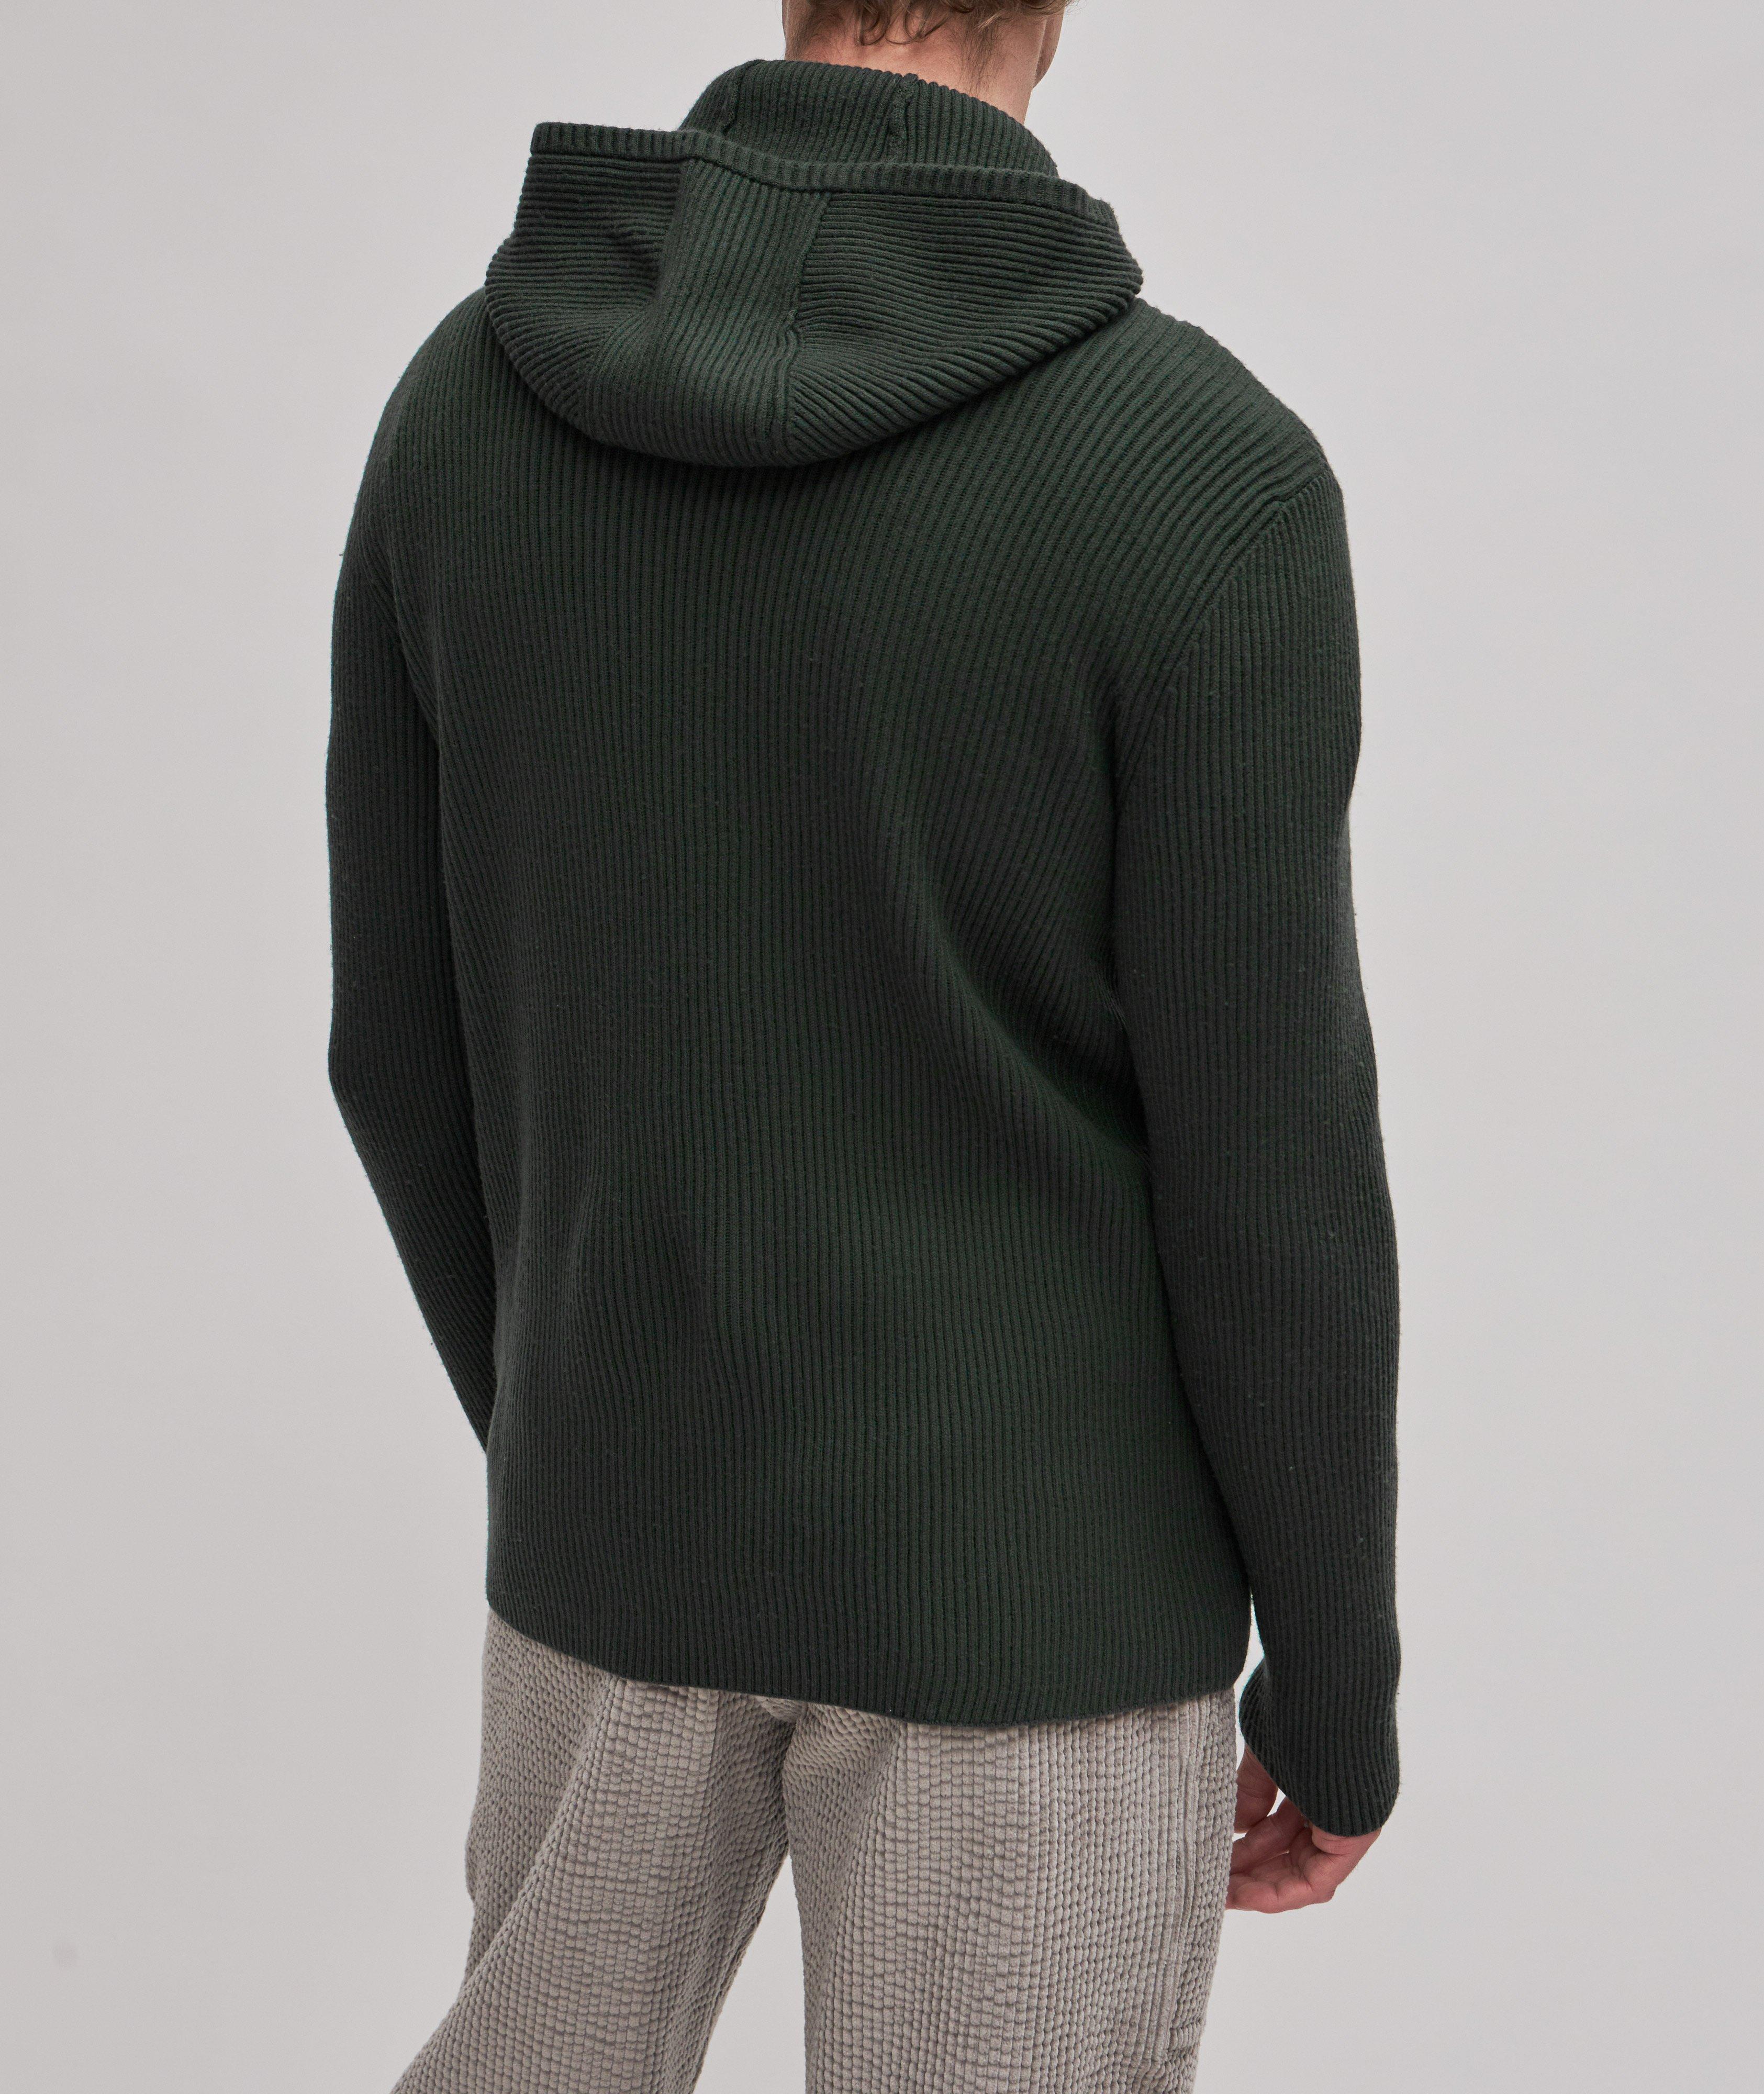 Texture Ribbed-Knit Hooded Full-Zip Sweater image 2